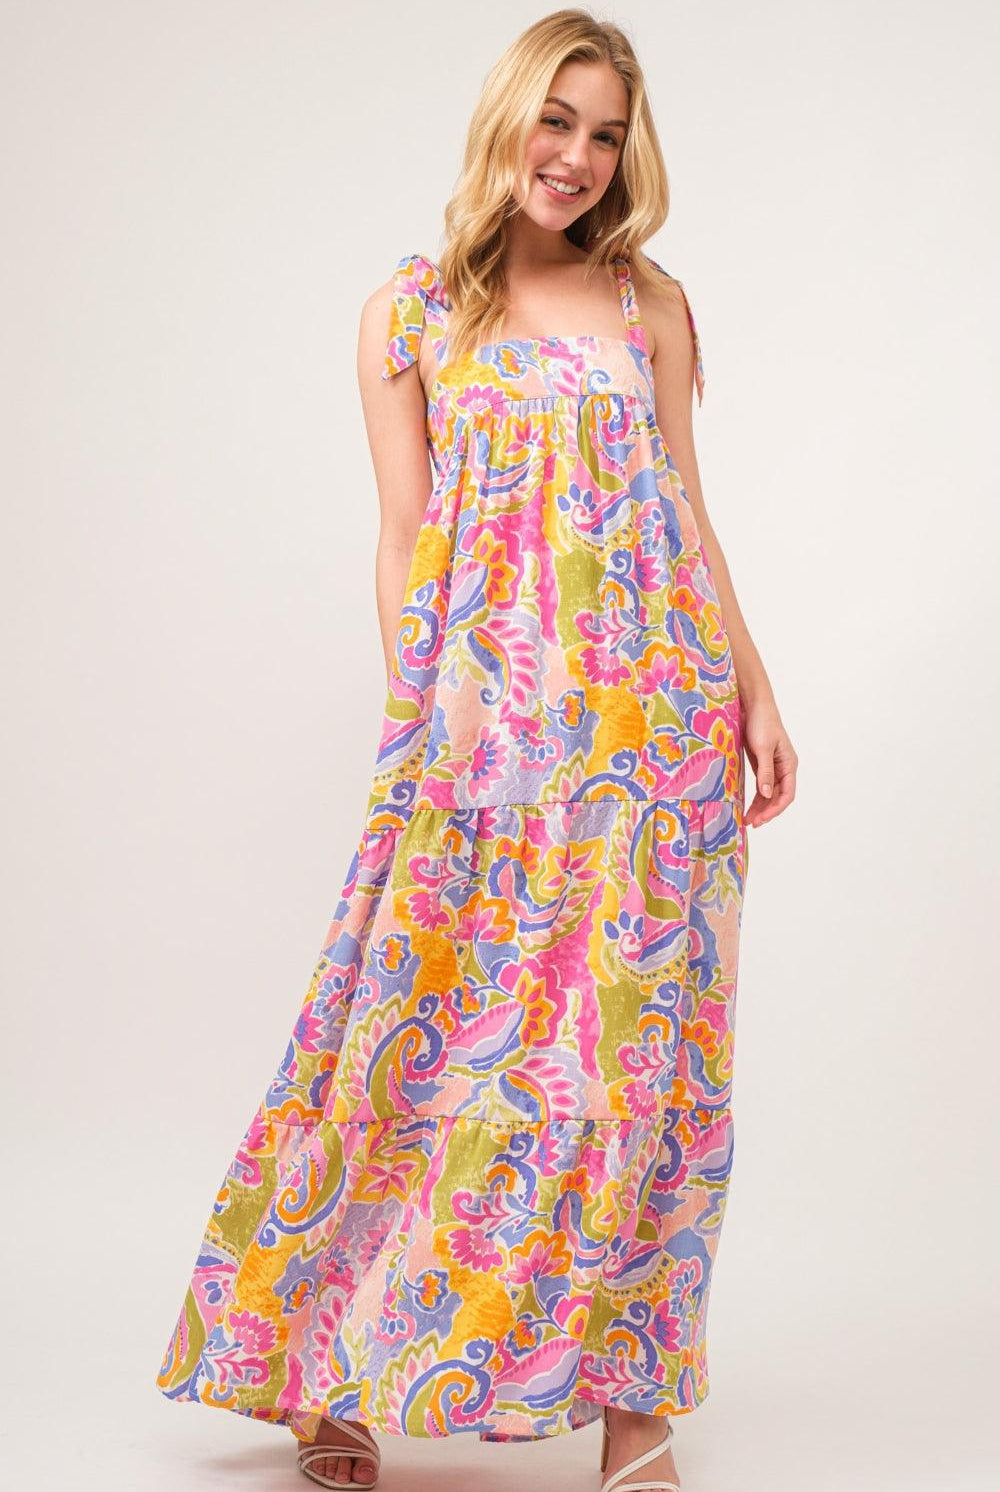 Women's Dresses And The Why Full Size Printed Tie Shoulder Tiered Maxi Dress